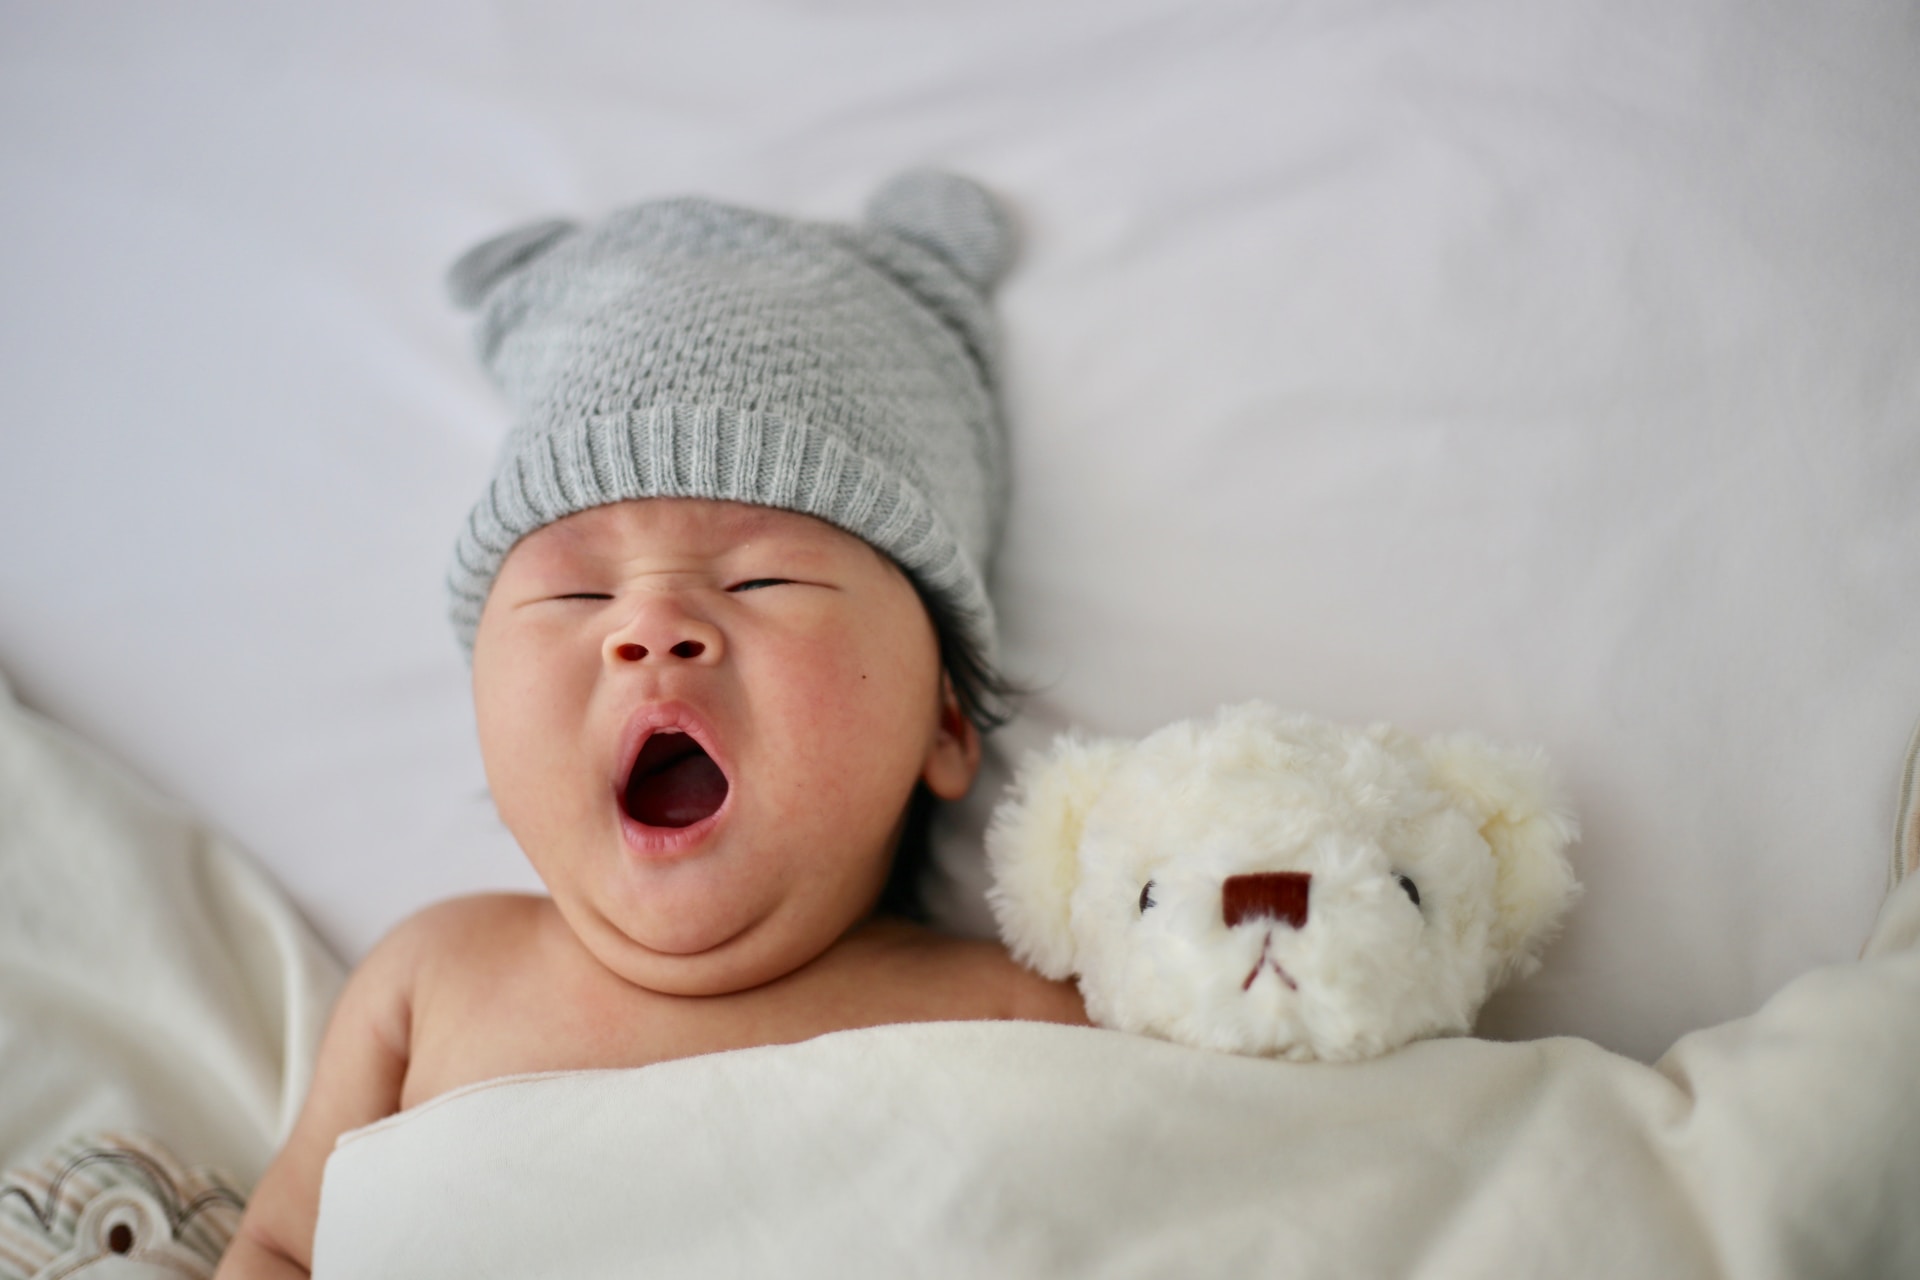 A baby with their mouth open laying with a bear toy